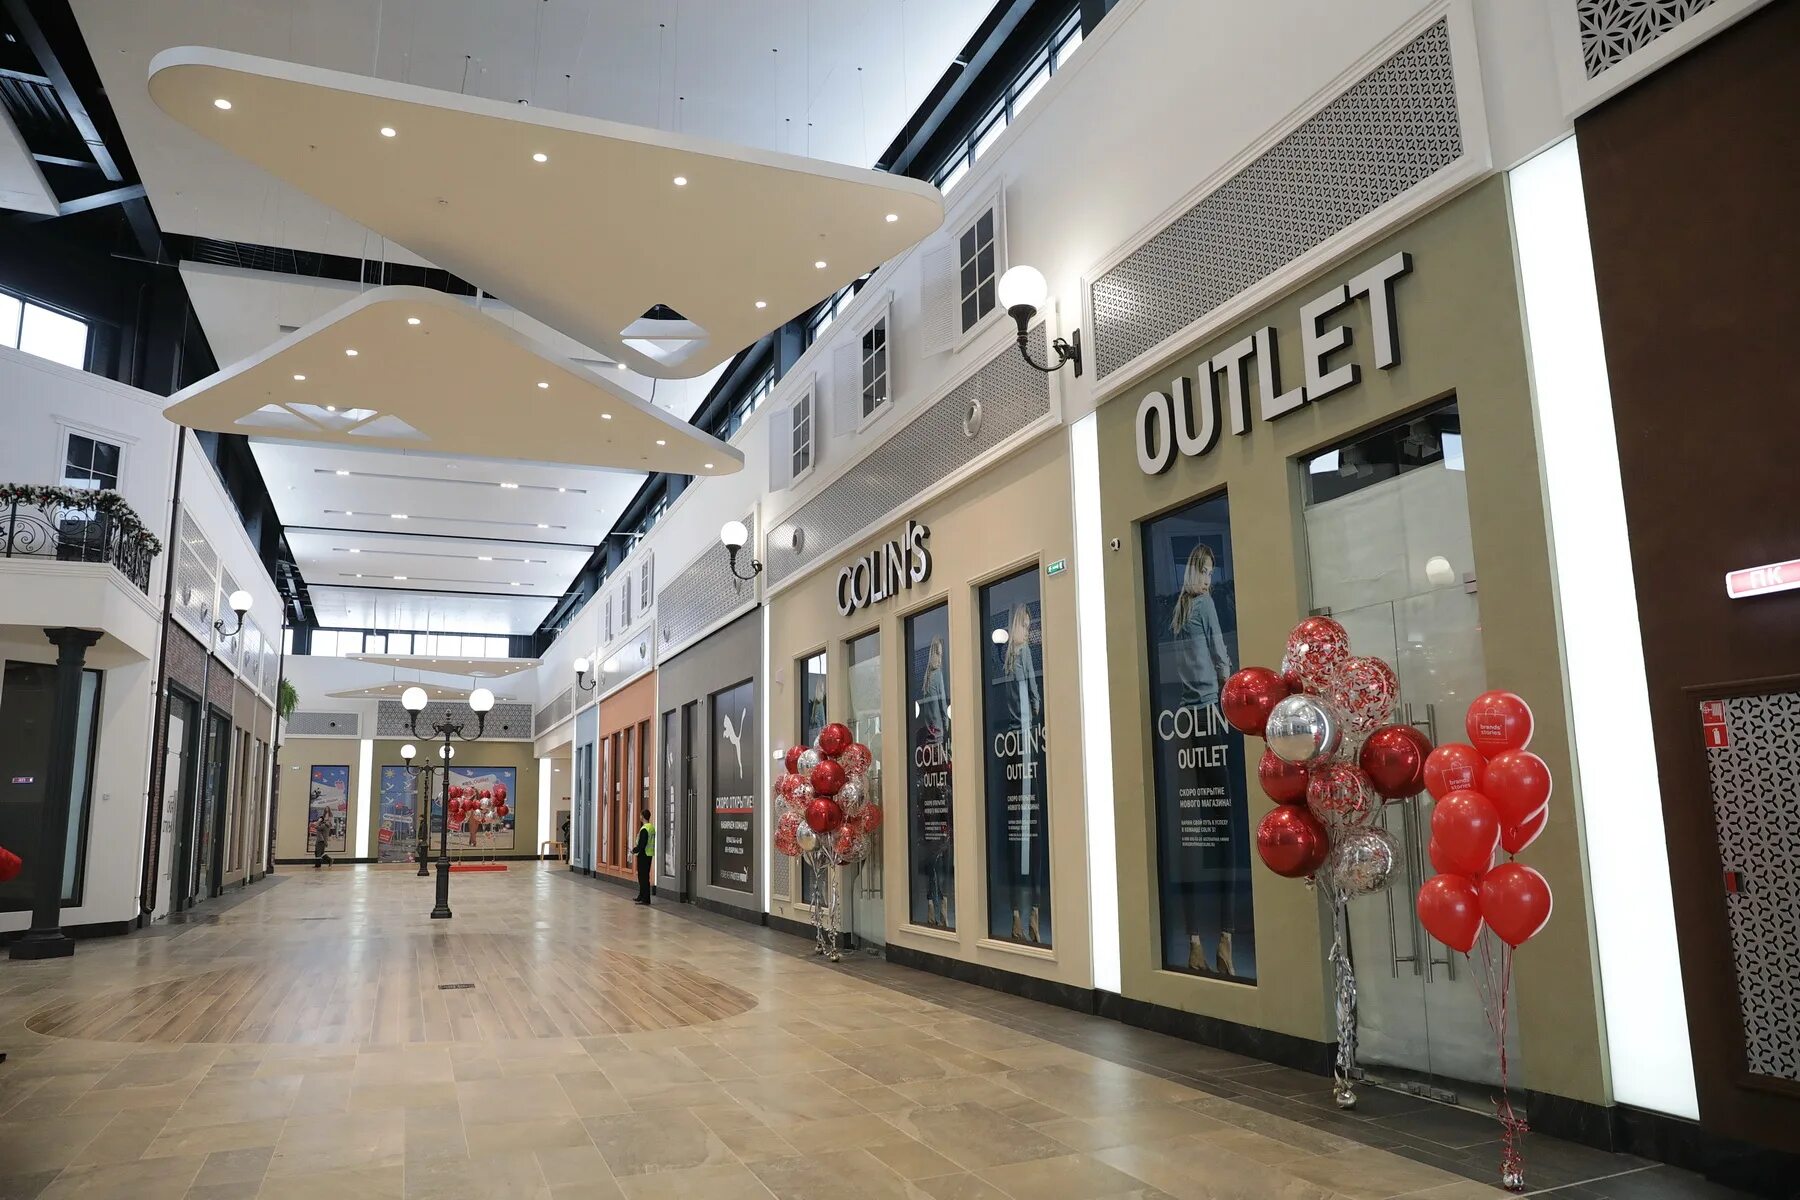 Тц outlet. Brands stories Outlet Екатеринбург. Бренд стори аутлет в Екатеринбурге. Аутлет в Солнечном Екатеринбург. ТЦ бренд стори Екатеринбург.